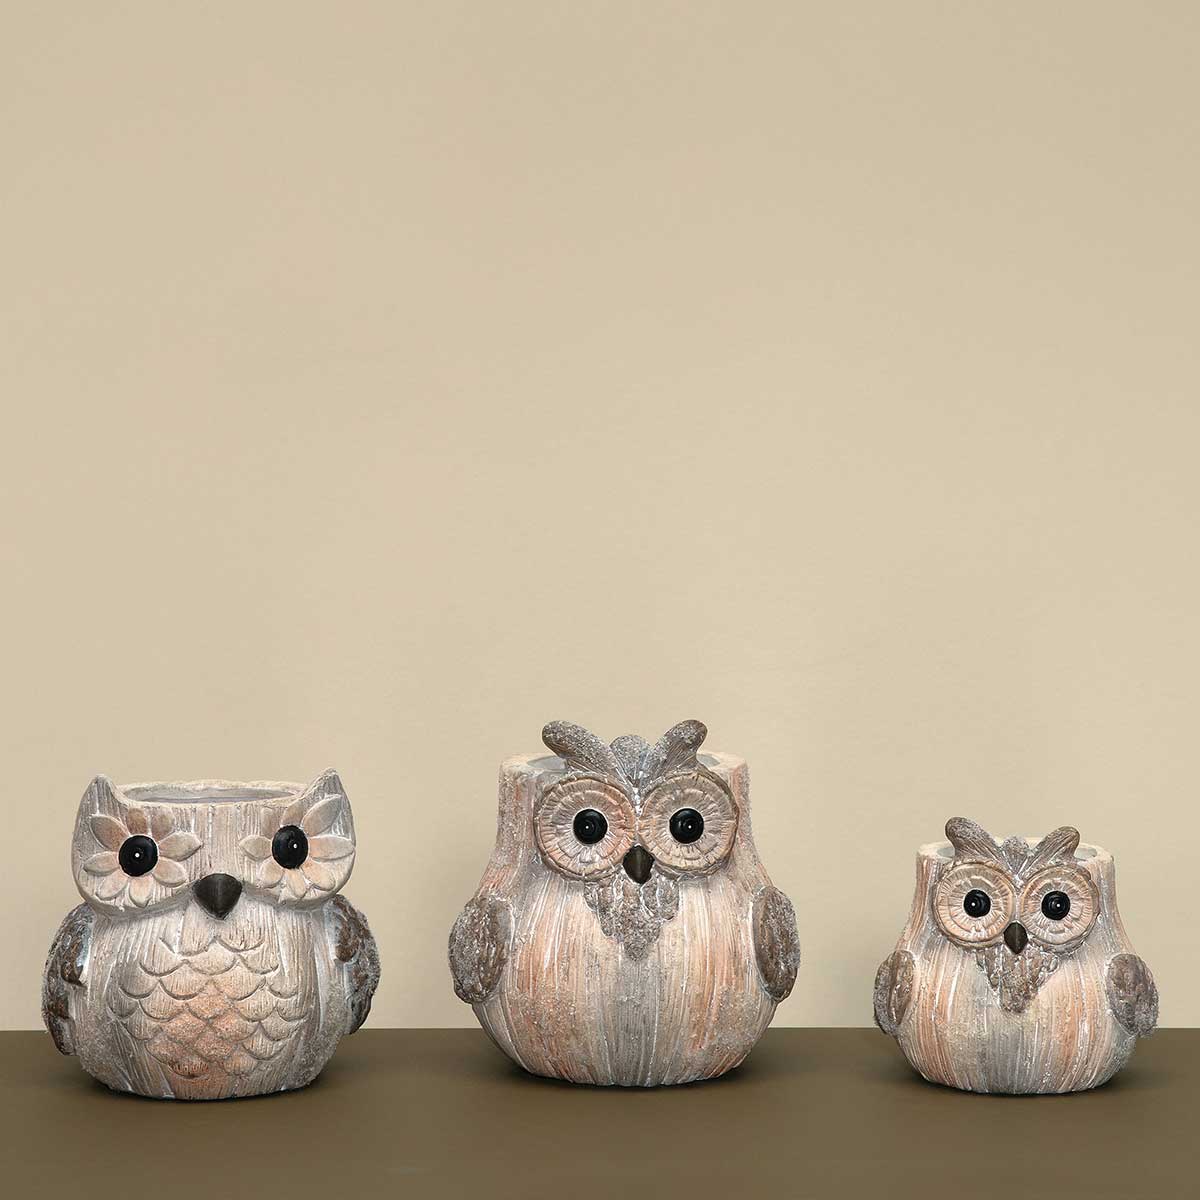 OLLIE FROSTED CERAMIC OWL POT CREAM/BROWN WITH MICA LG - Click Image to Close